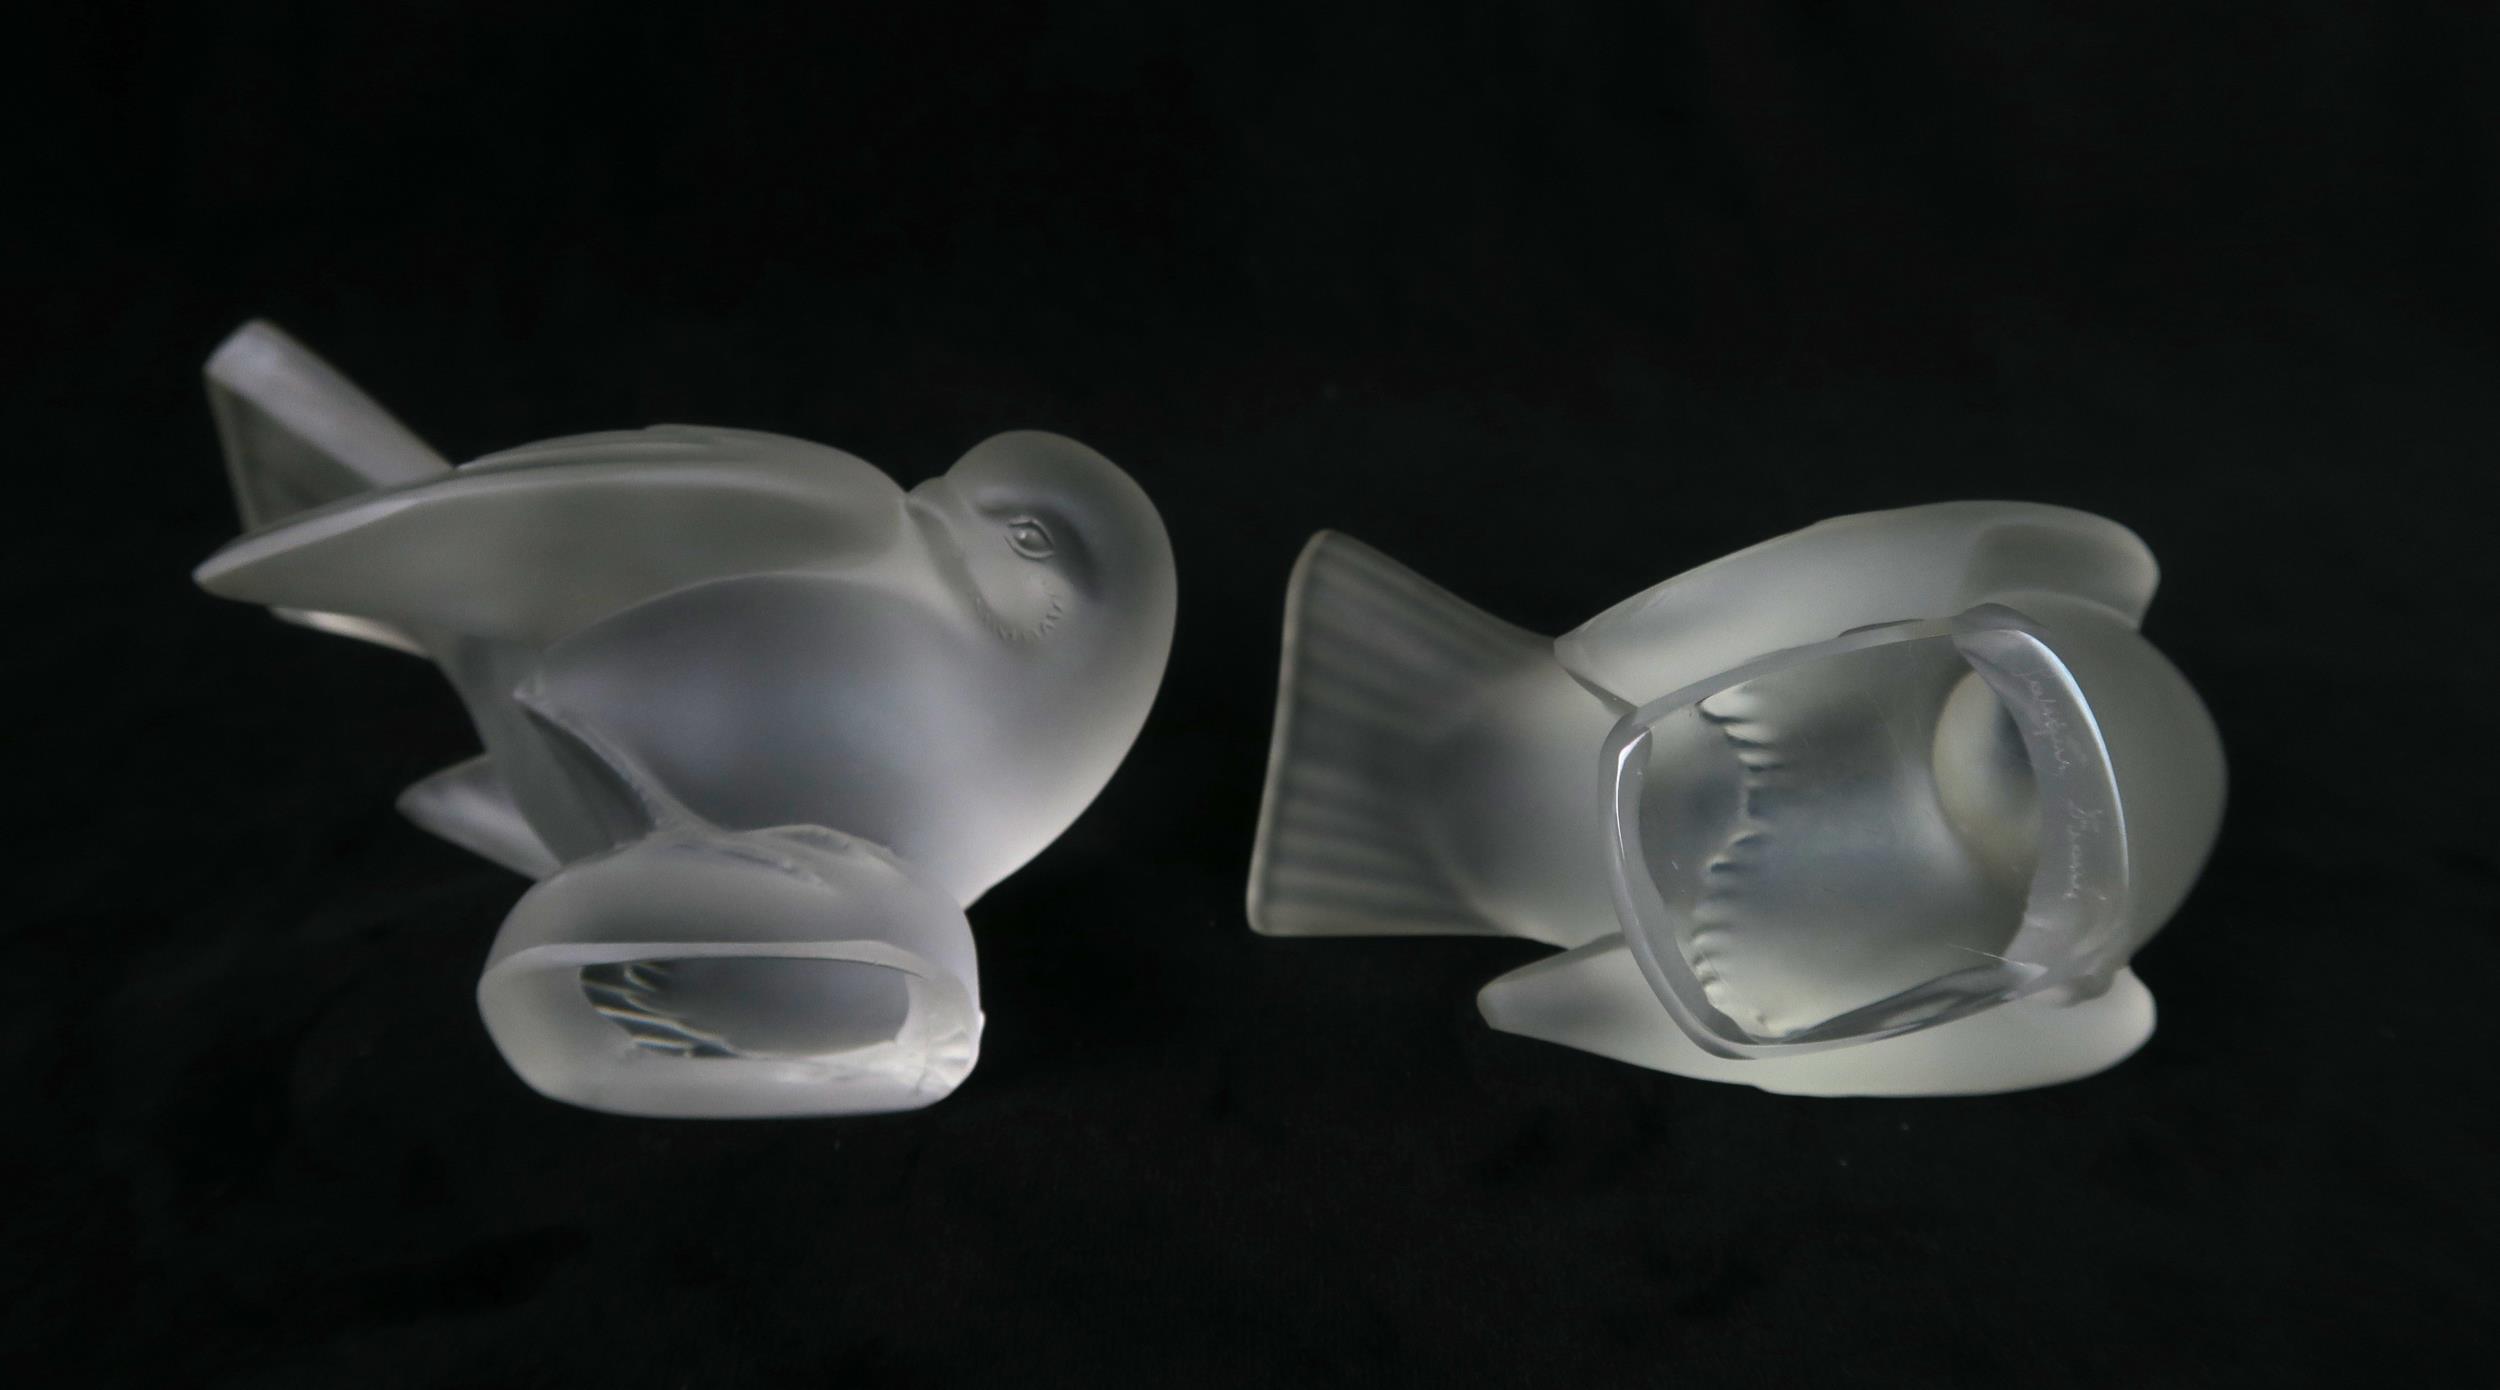 A PAIR OF LALIQUE BIRDS including Moineau Coquet and the other Moineau Moquer, 11cm long together - Image 3 of 5